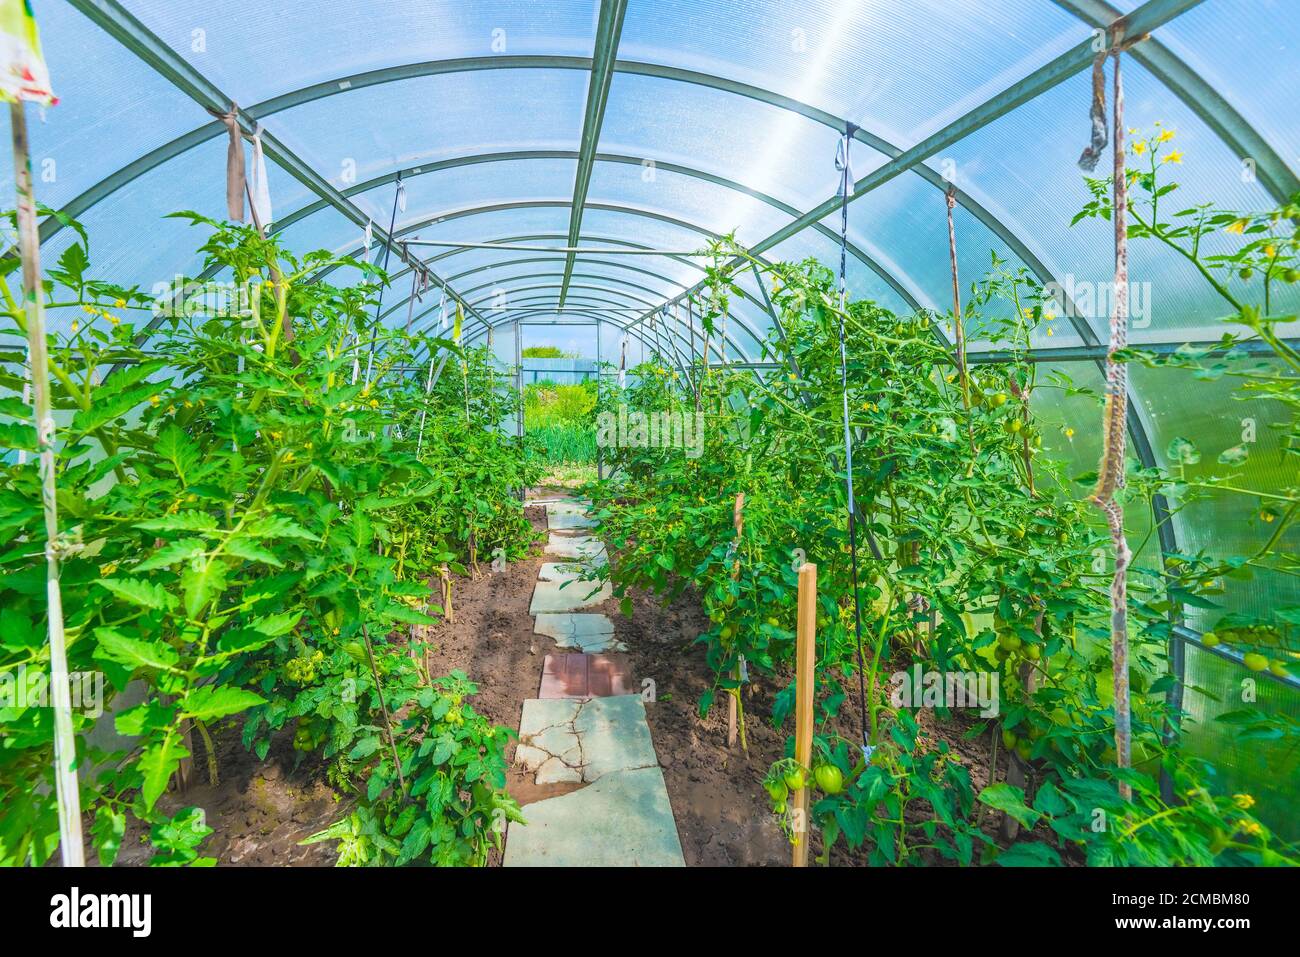 arched greenhouse Stock Photo